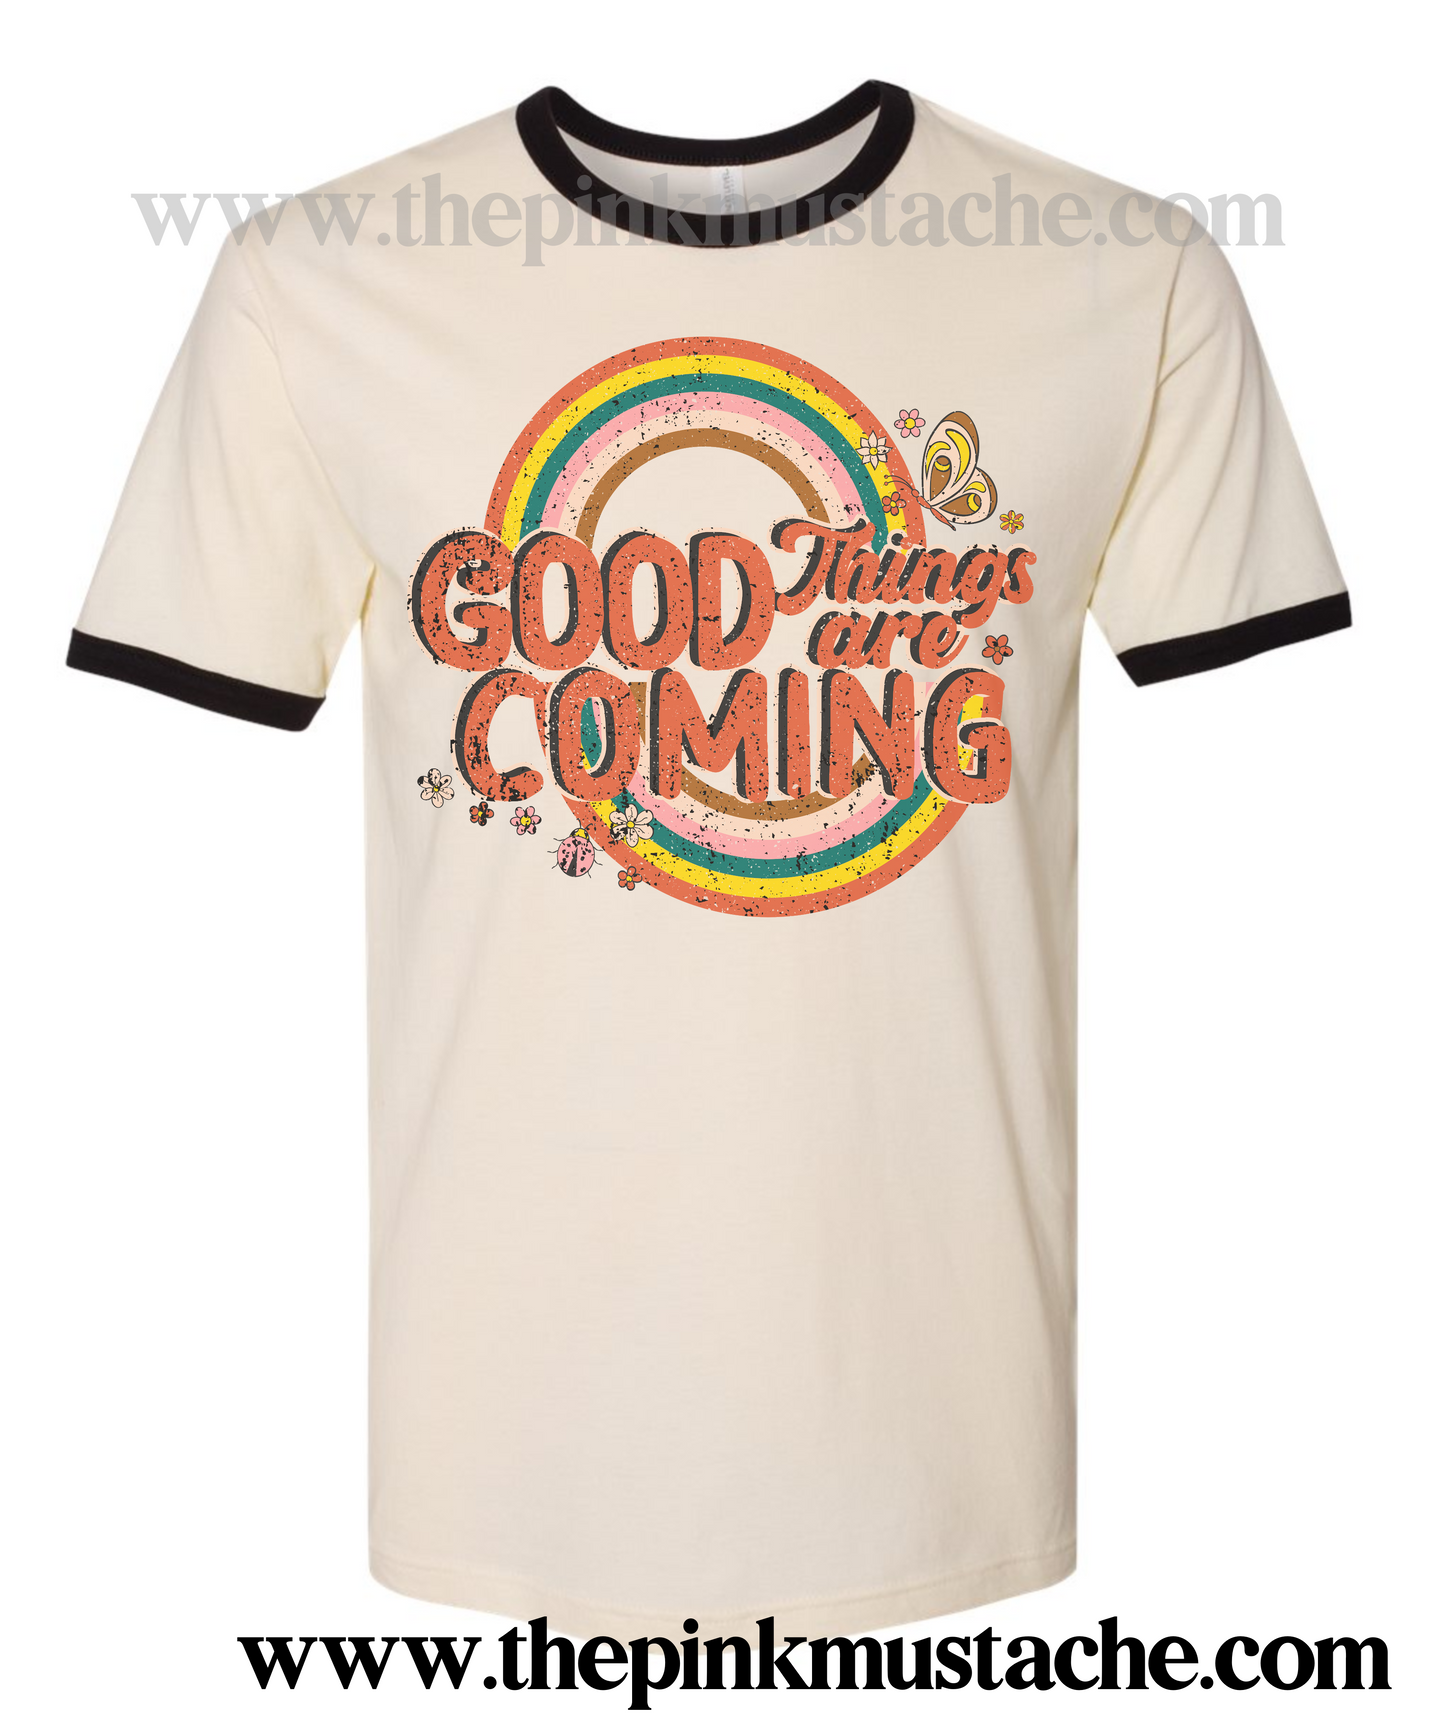 Good Things Are Coming Retro Ringer Tee- Retro Vibes Softstyle Shirt/ St. Patricks Day Rainbow Positive Vibes Tee